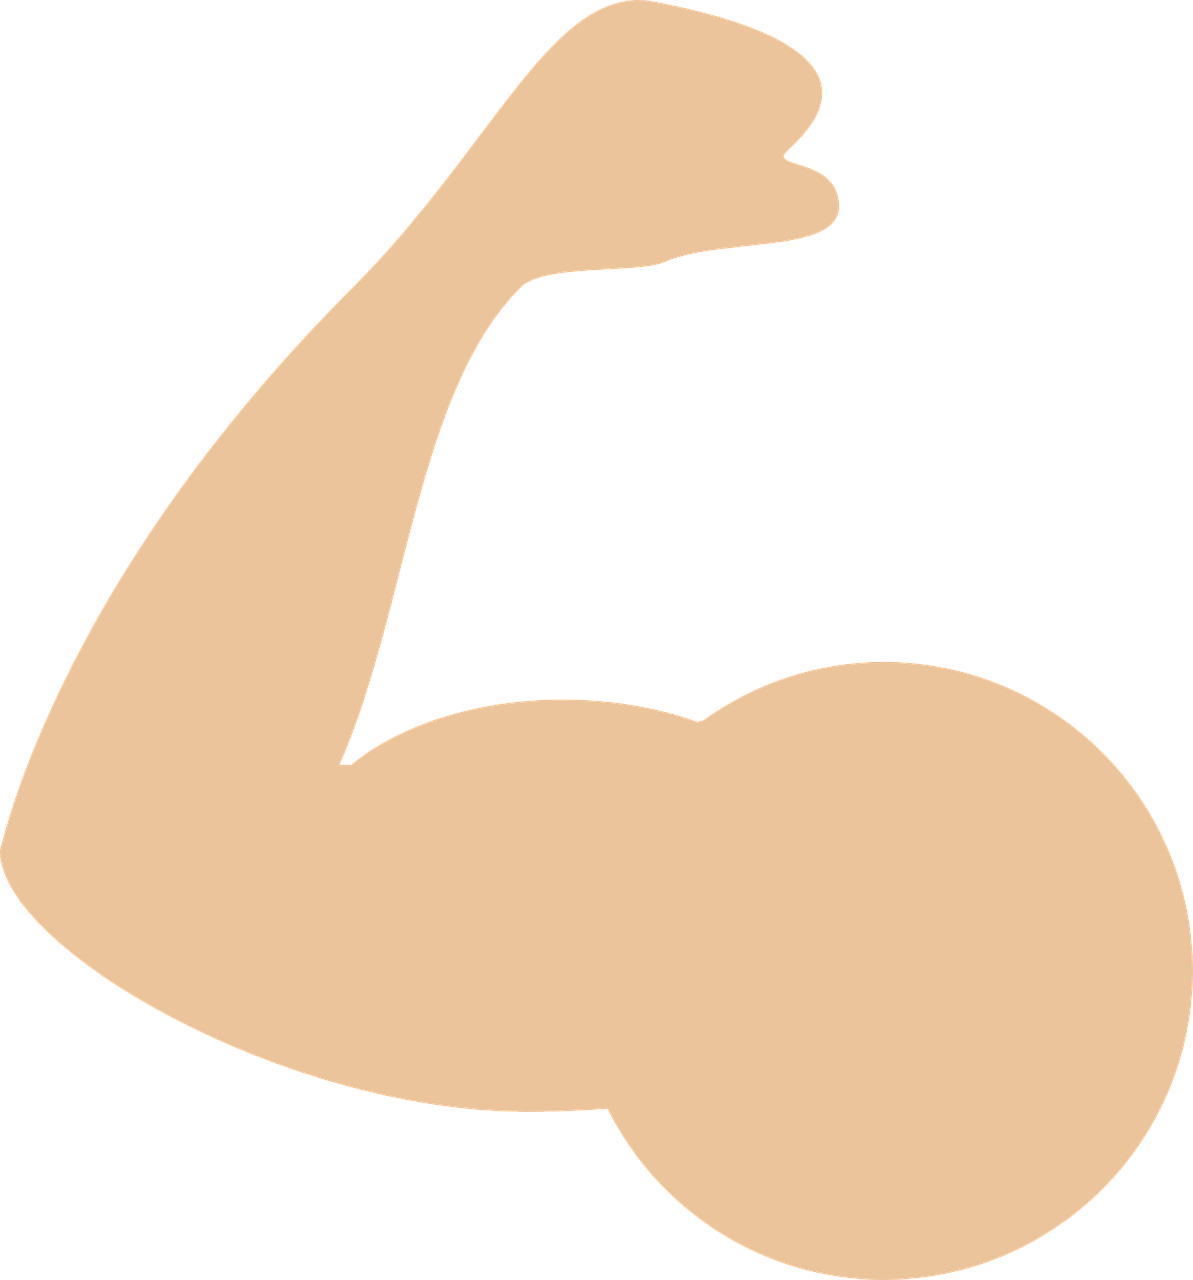 muscle arm icon free photo